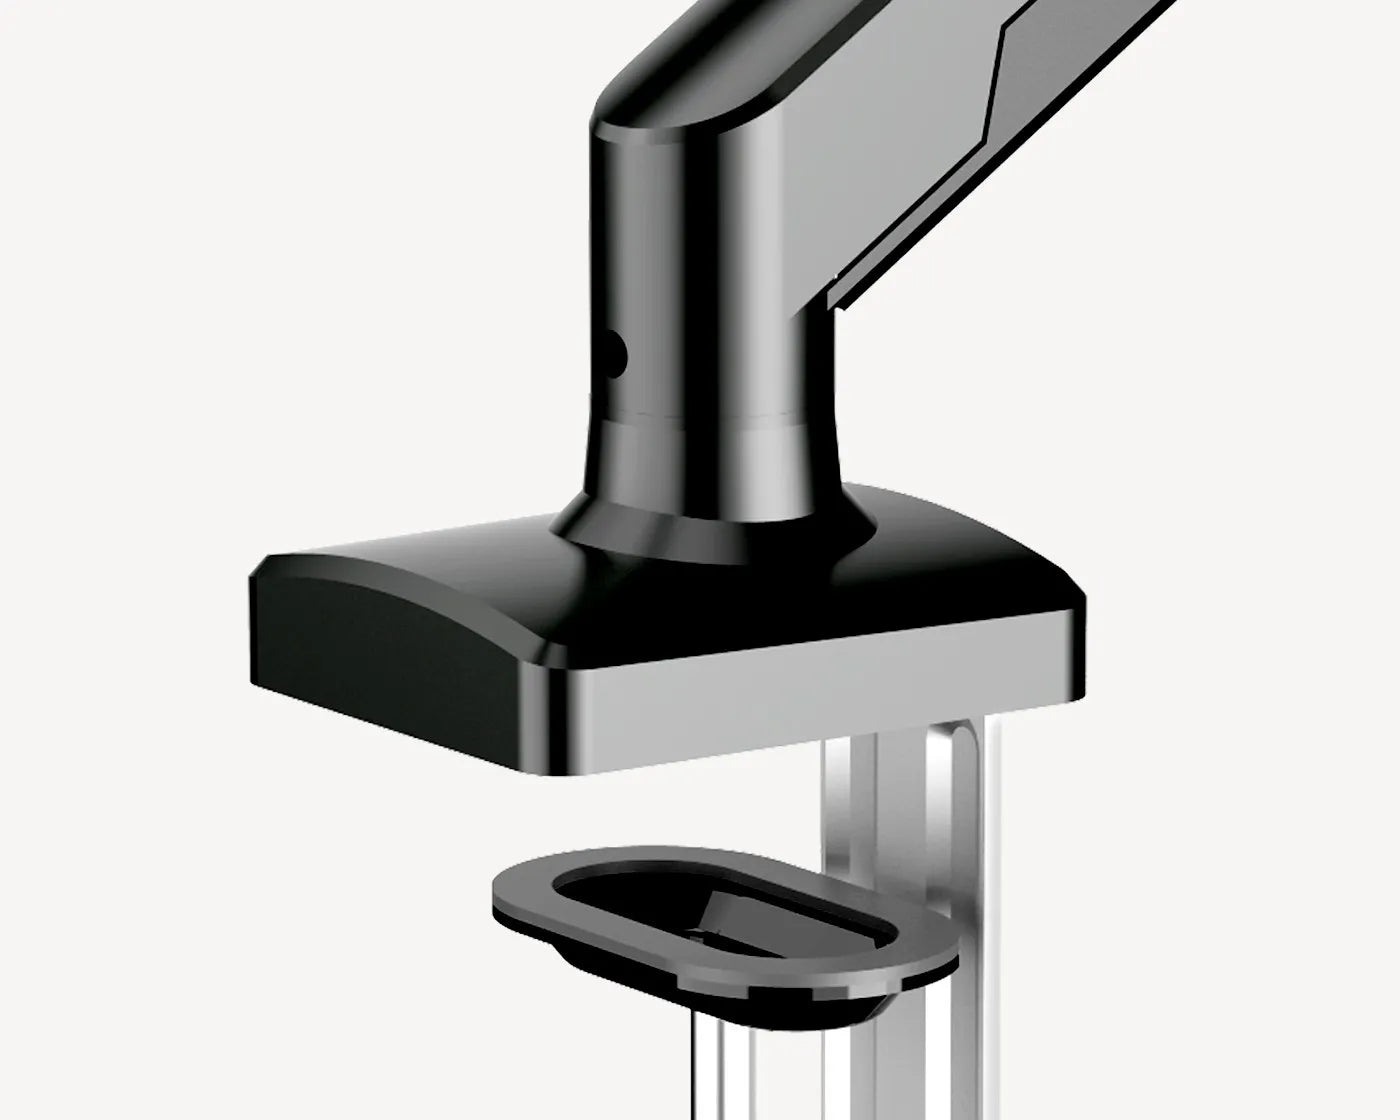 Clamp and grommet mounting options of the Flujo XTFlex monitor arm for diverse desk setups.